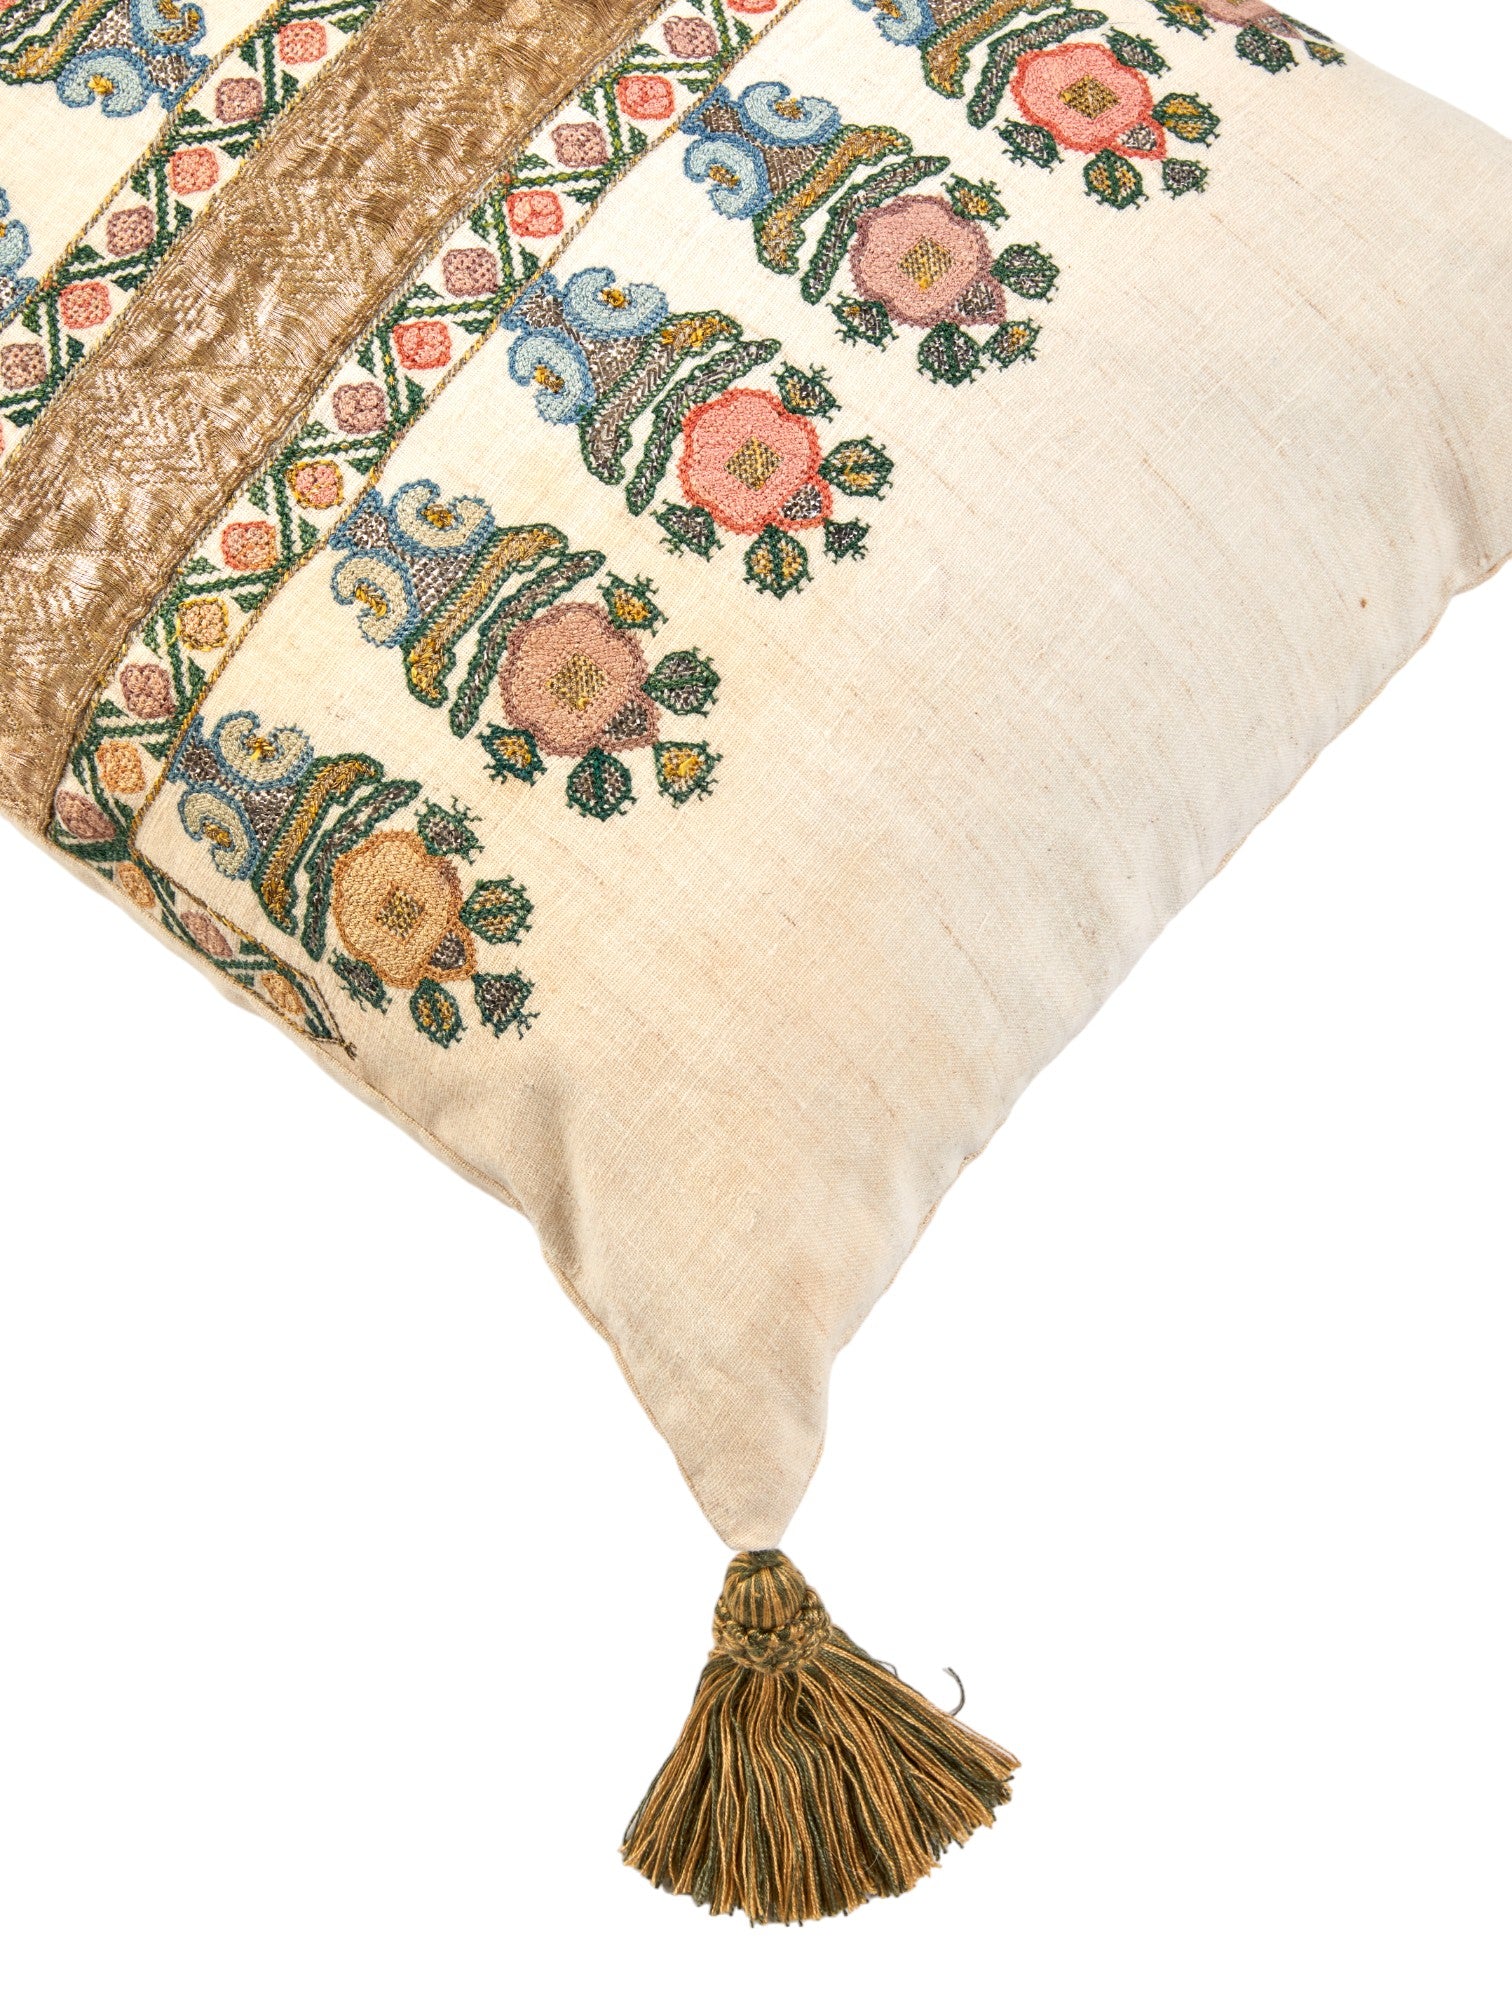 A Cushion made from an Embroidered Ottoman Fragment with Antique Braid and Corner Tassels